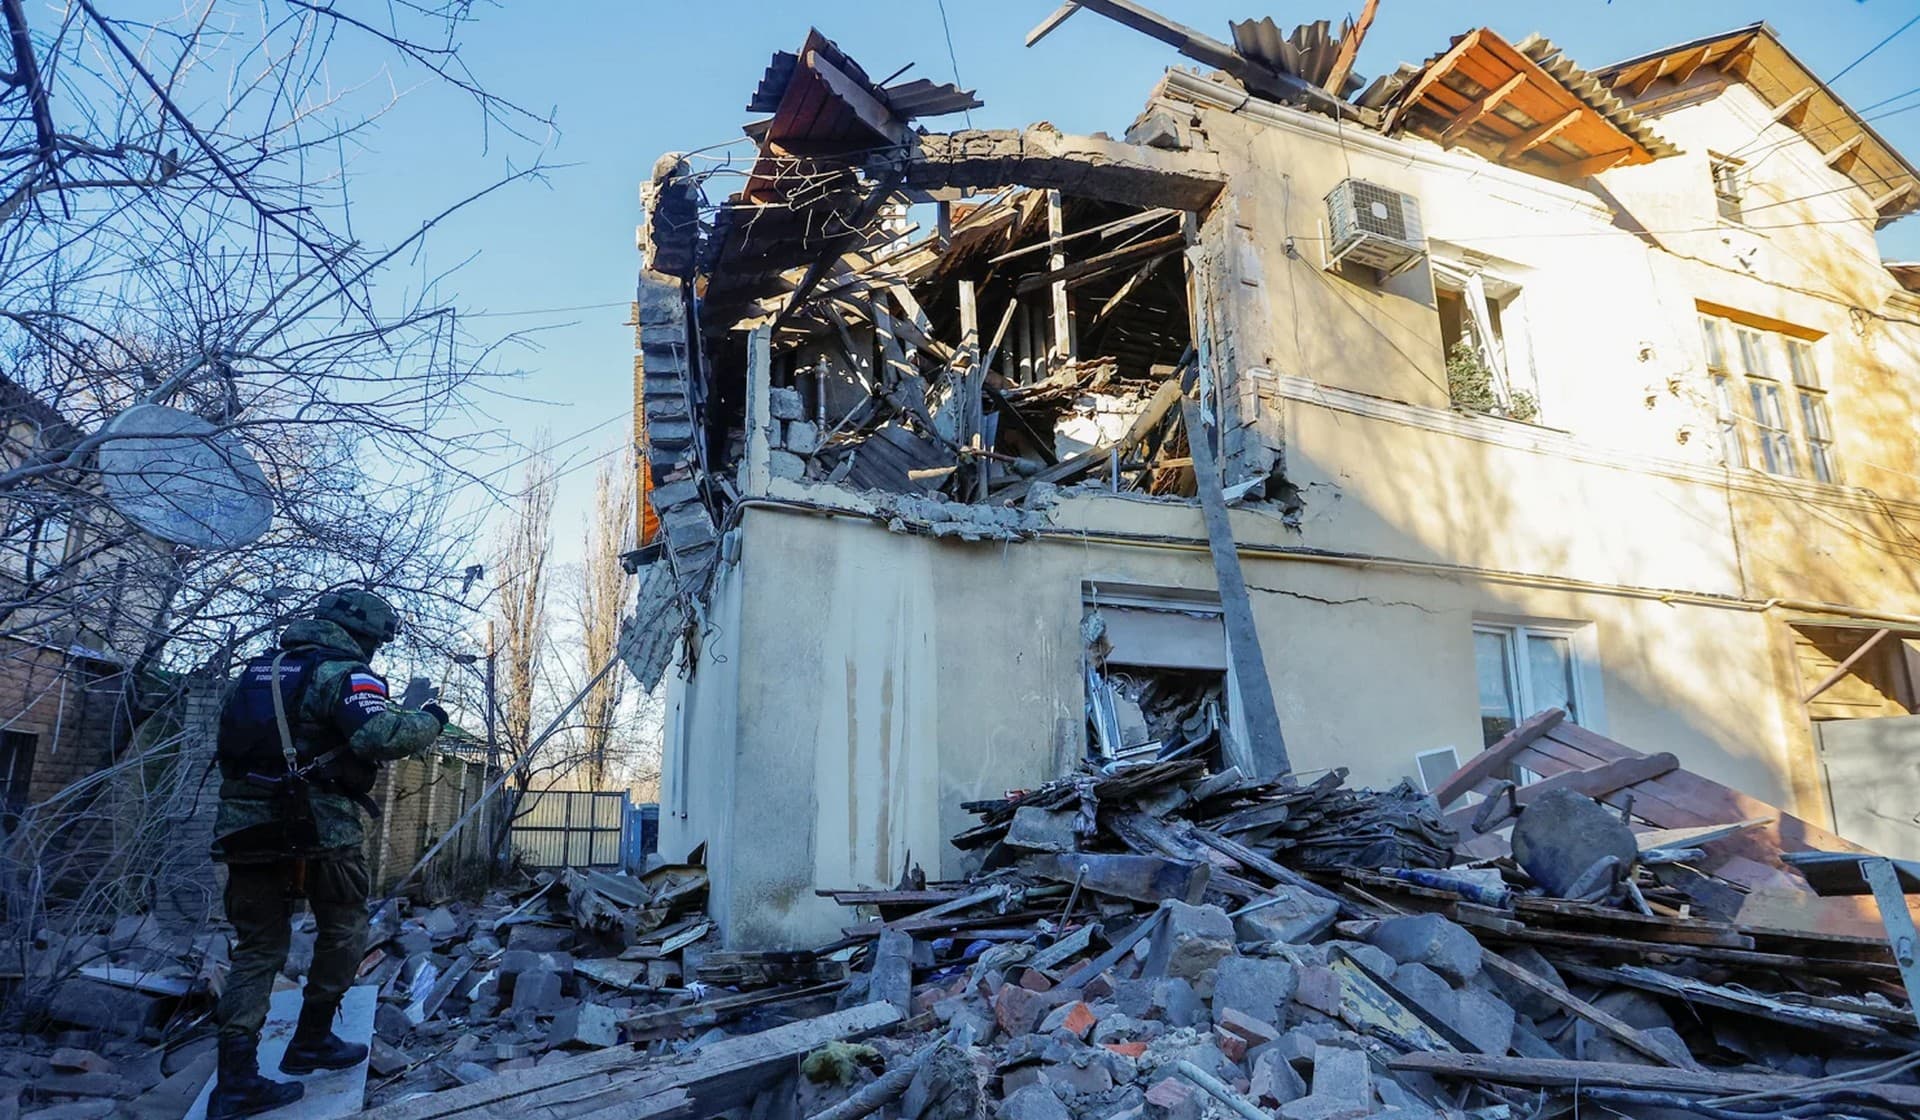 A Russian military investigator works outside a residential building heavily damaged in recent shelling in Donetsk